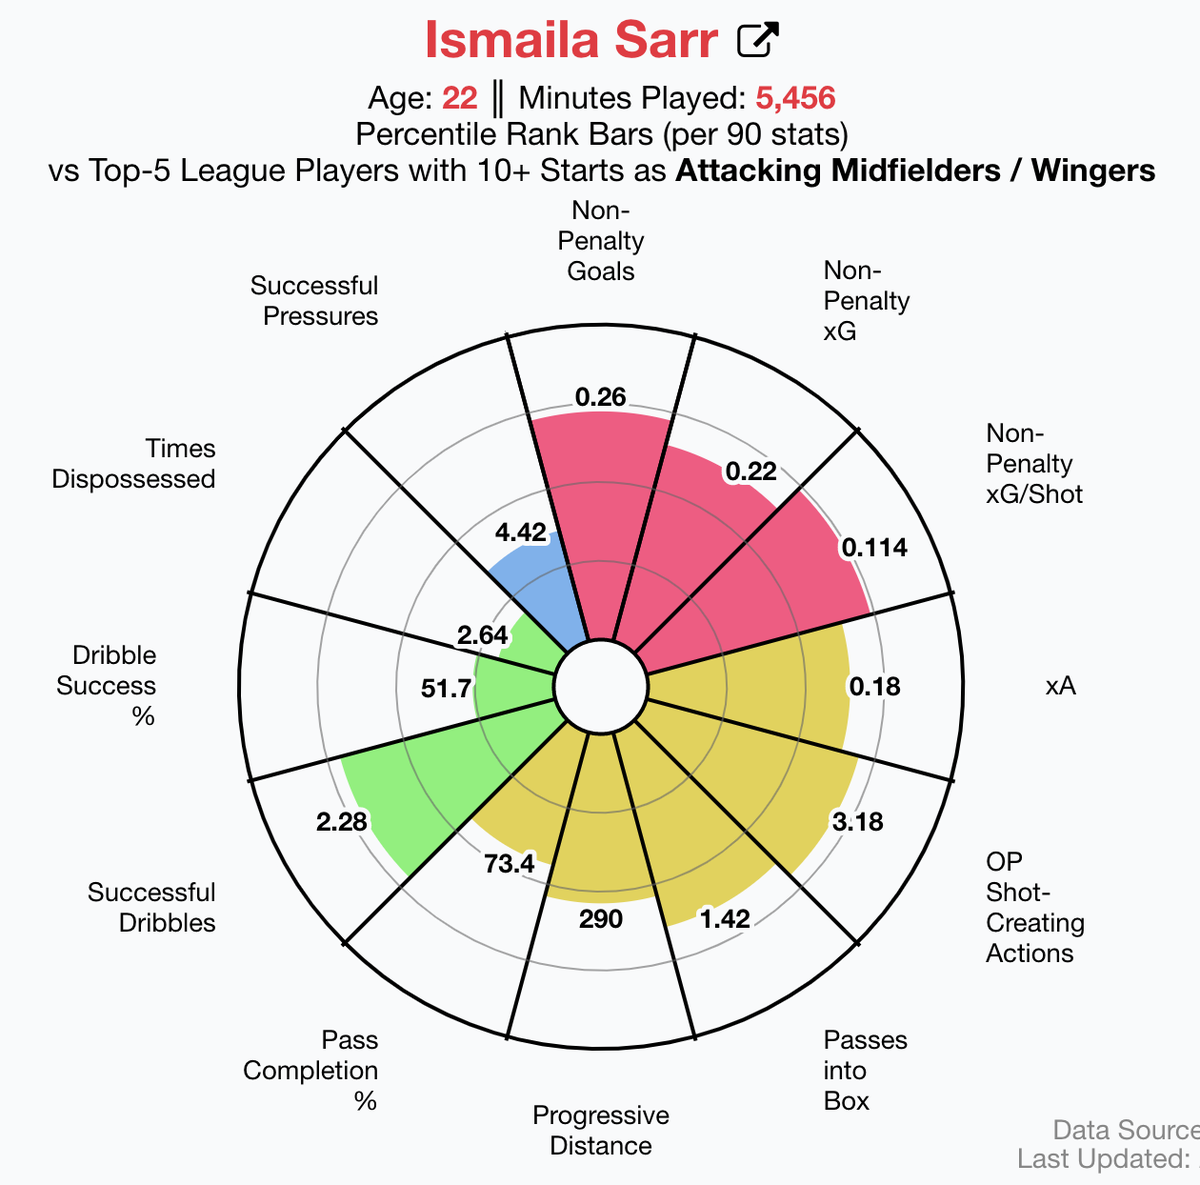 Shaqiri/Lallana (Origi?) replacements. I wouldn't mind one or two out of Ismail Sarr (Watford), Todd Cantwell (Norwich), Emiliano Buendia (Norwich) and/or David Brooks (Bournemouth).